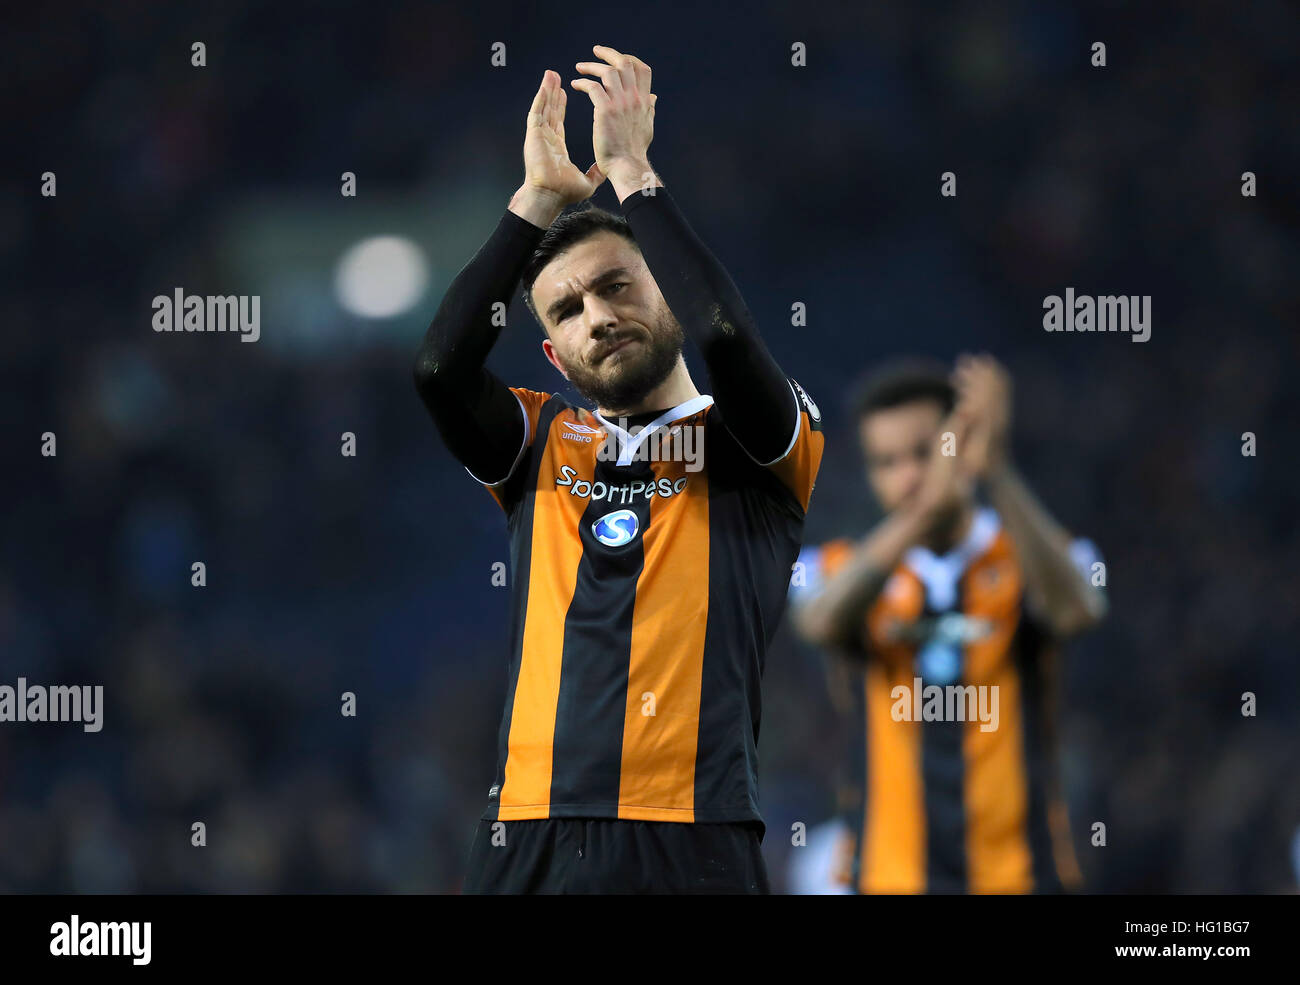 Hull City's Robert Snodgrass applauds the fans after the final whistle of the Premier League match at the The Hawthorns, West Bromwich. Stock Photo